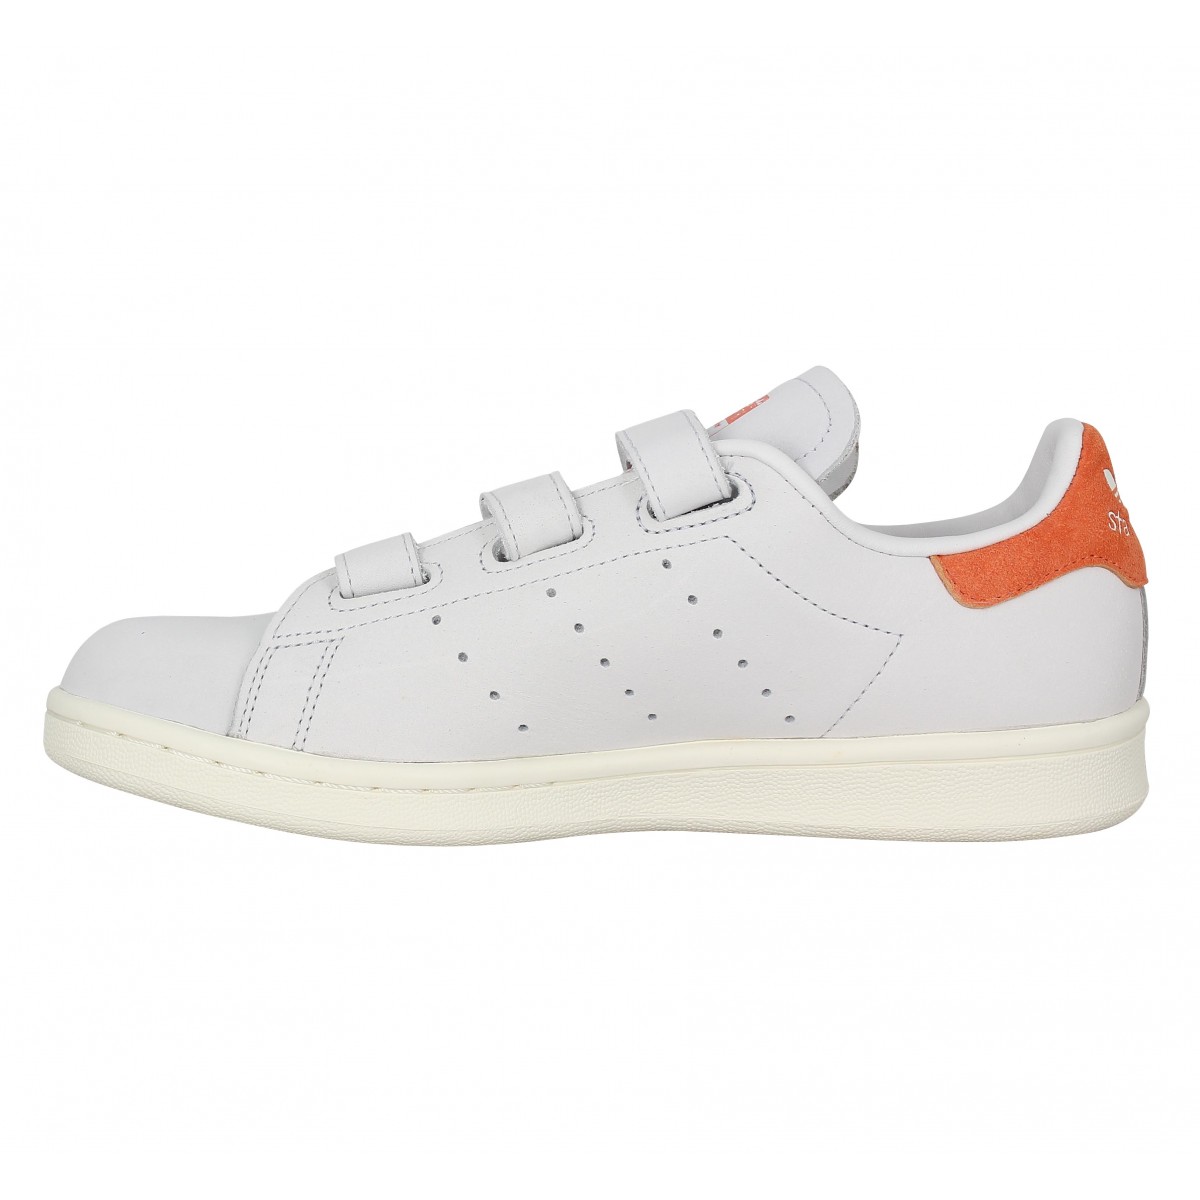 dsquared sneakers maastricht